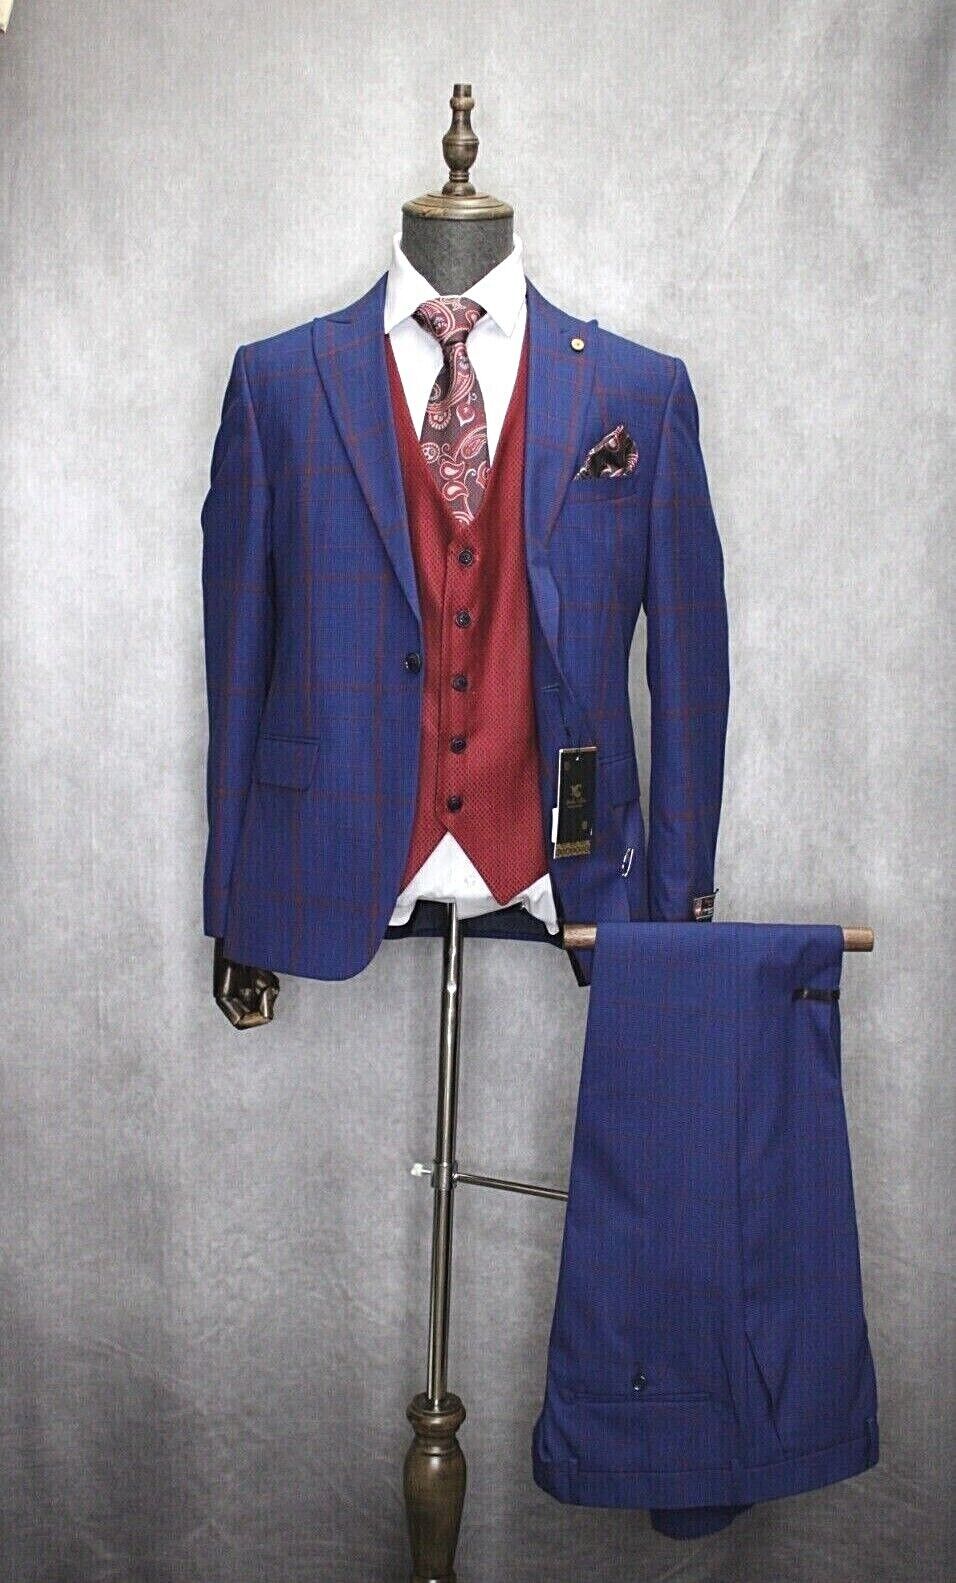 Mens Turkish Suit 3pc Slim Fit Blue and Red Plaid By Moda Color K231-08 Suits In Style